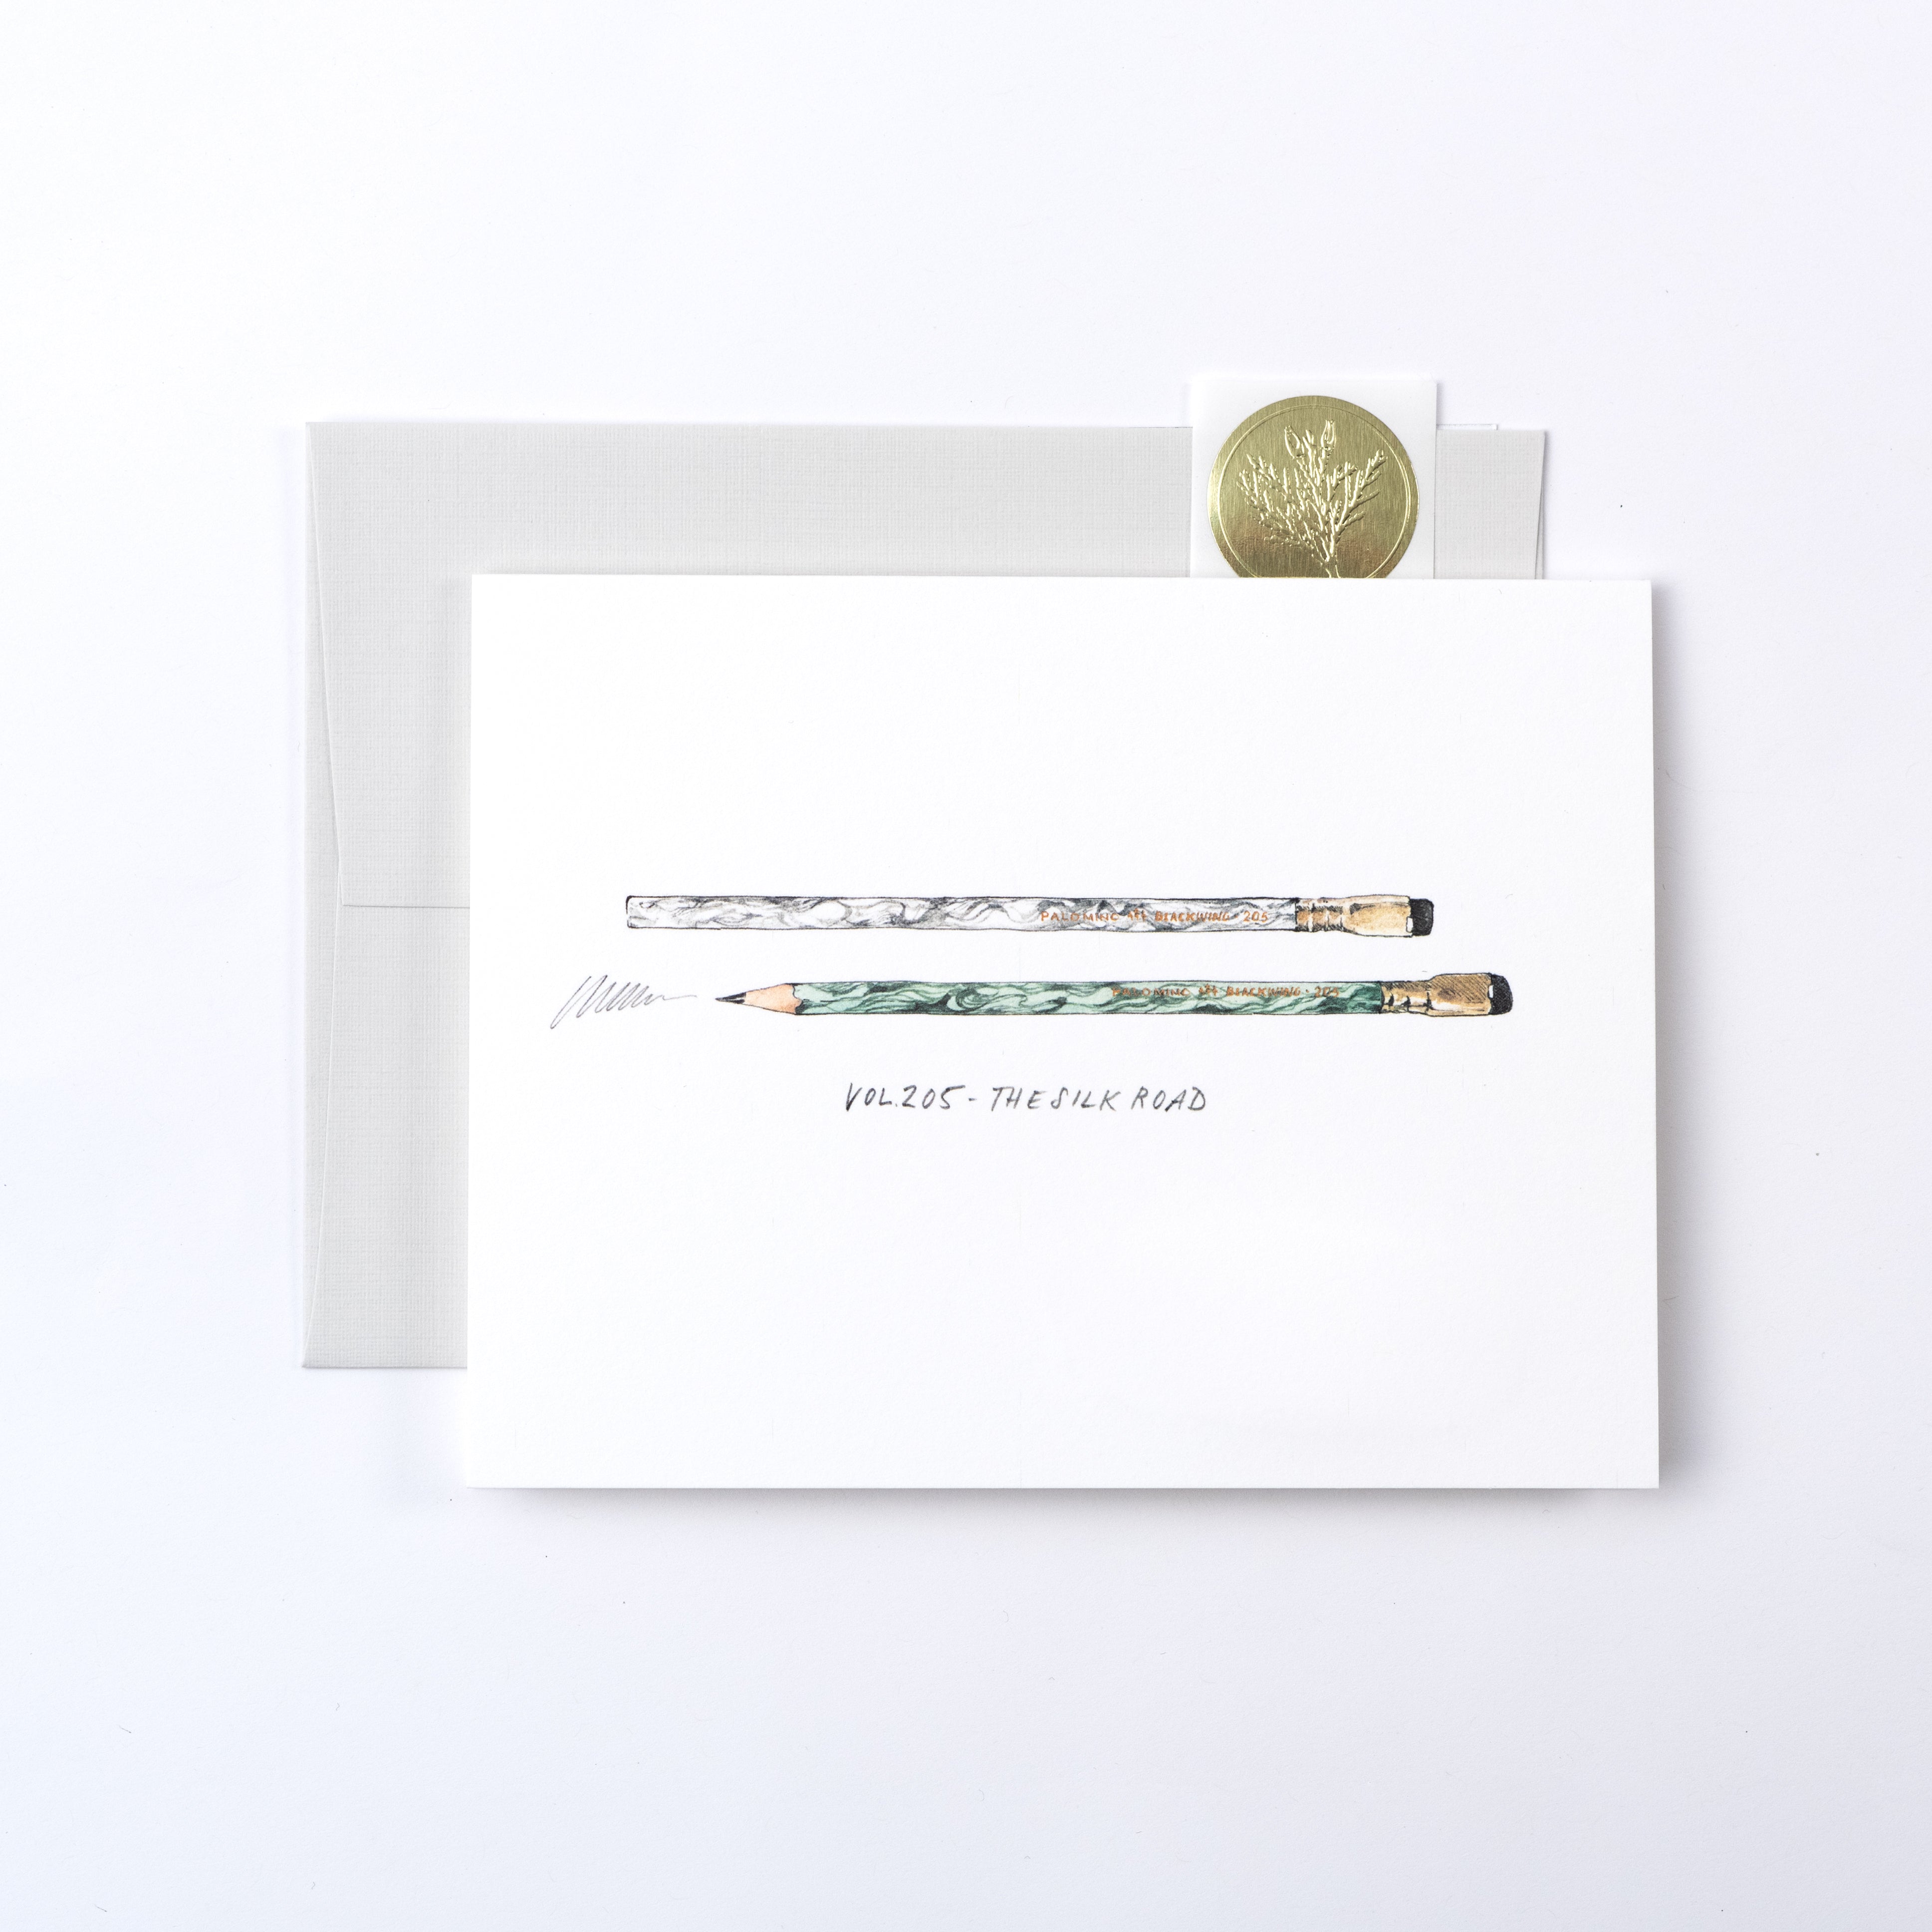 A white card with pencils and a coin from the Blackwing Volumes Notecards - Year 2 series.